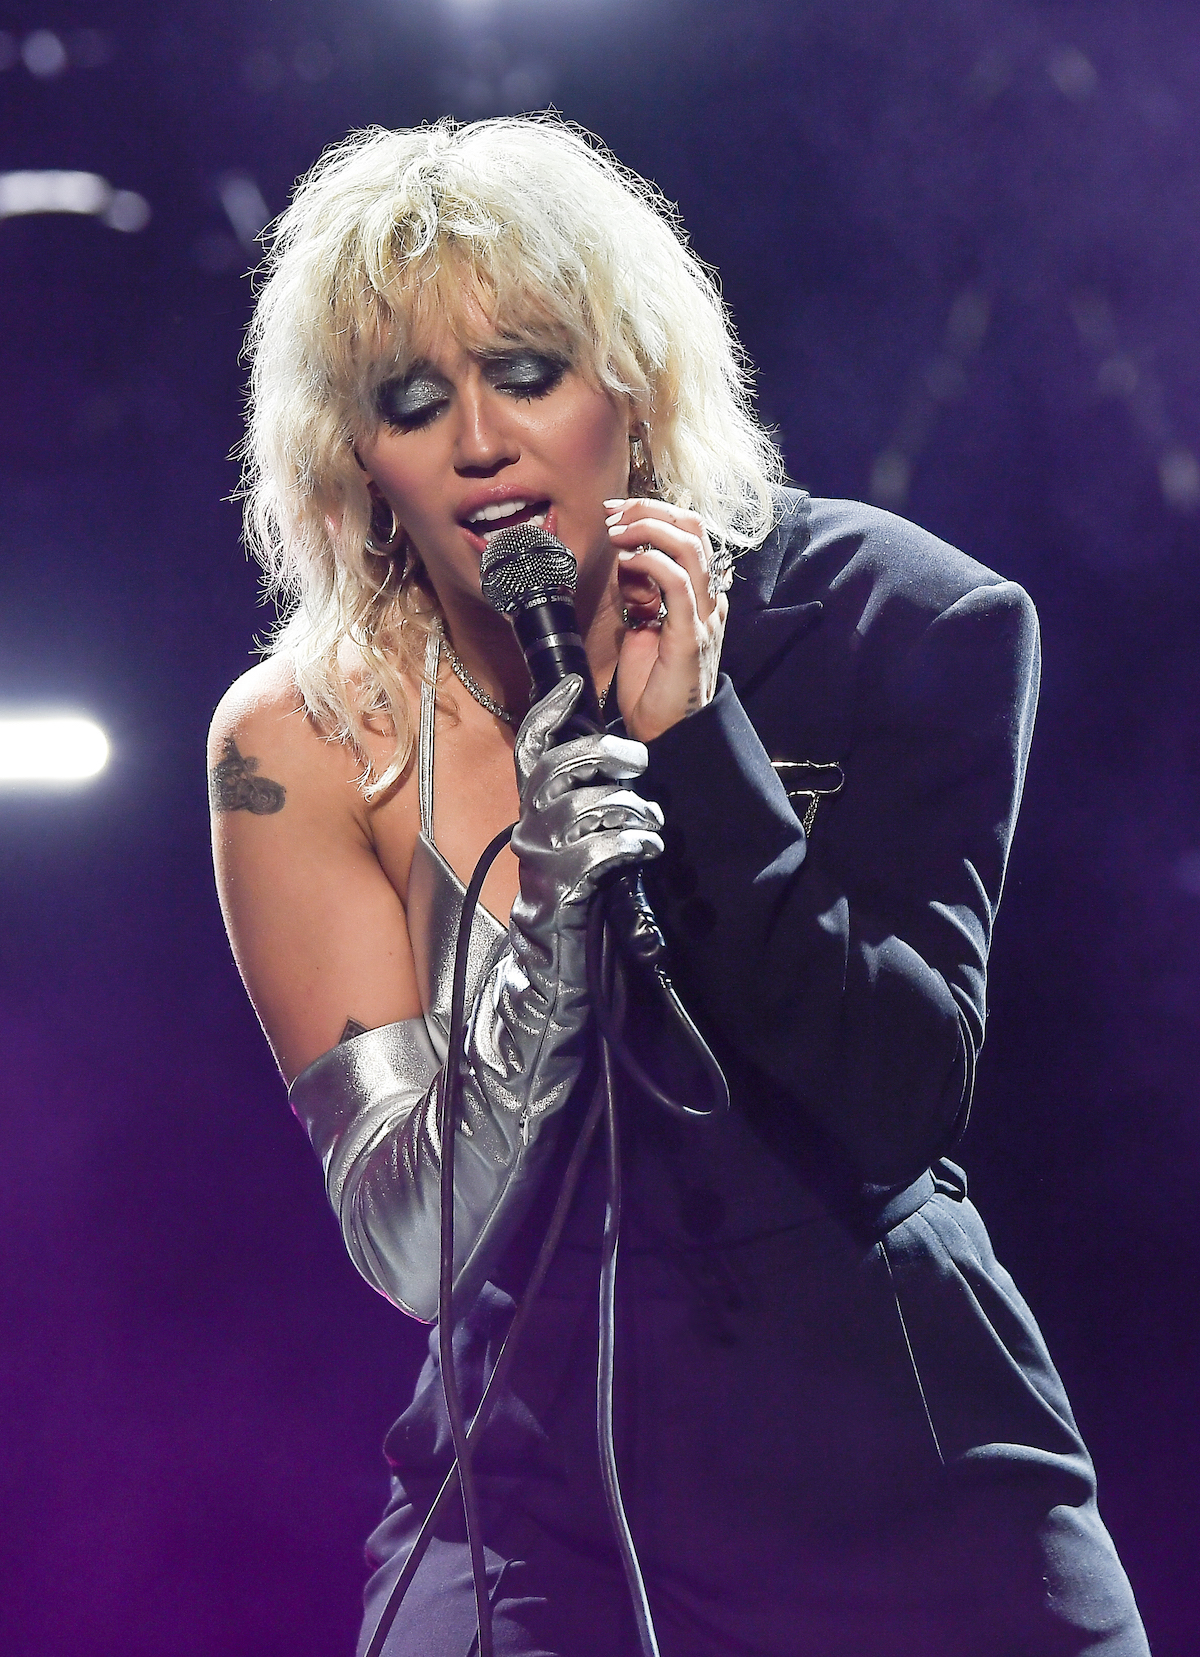 Miley Cyrus wearing silver eyeshadow sings passionately into a microphone on stage.